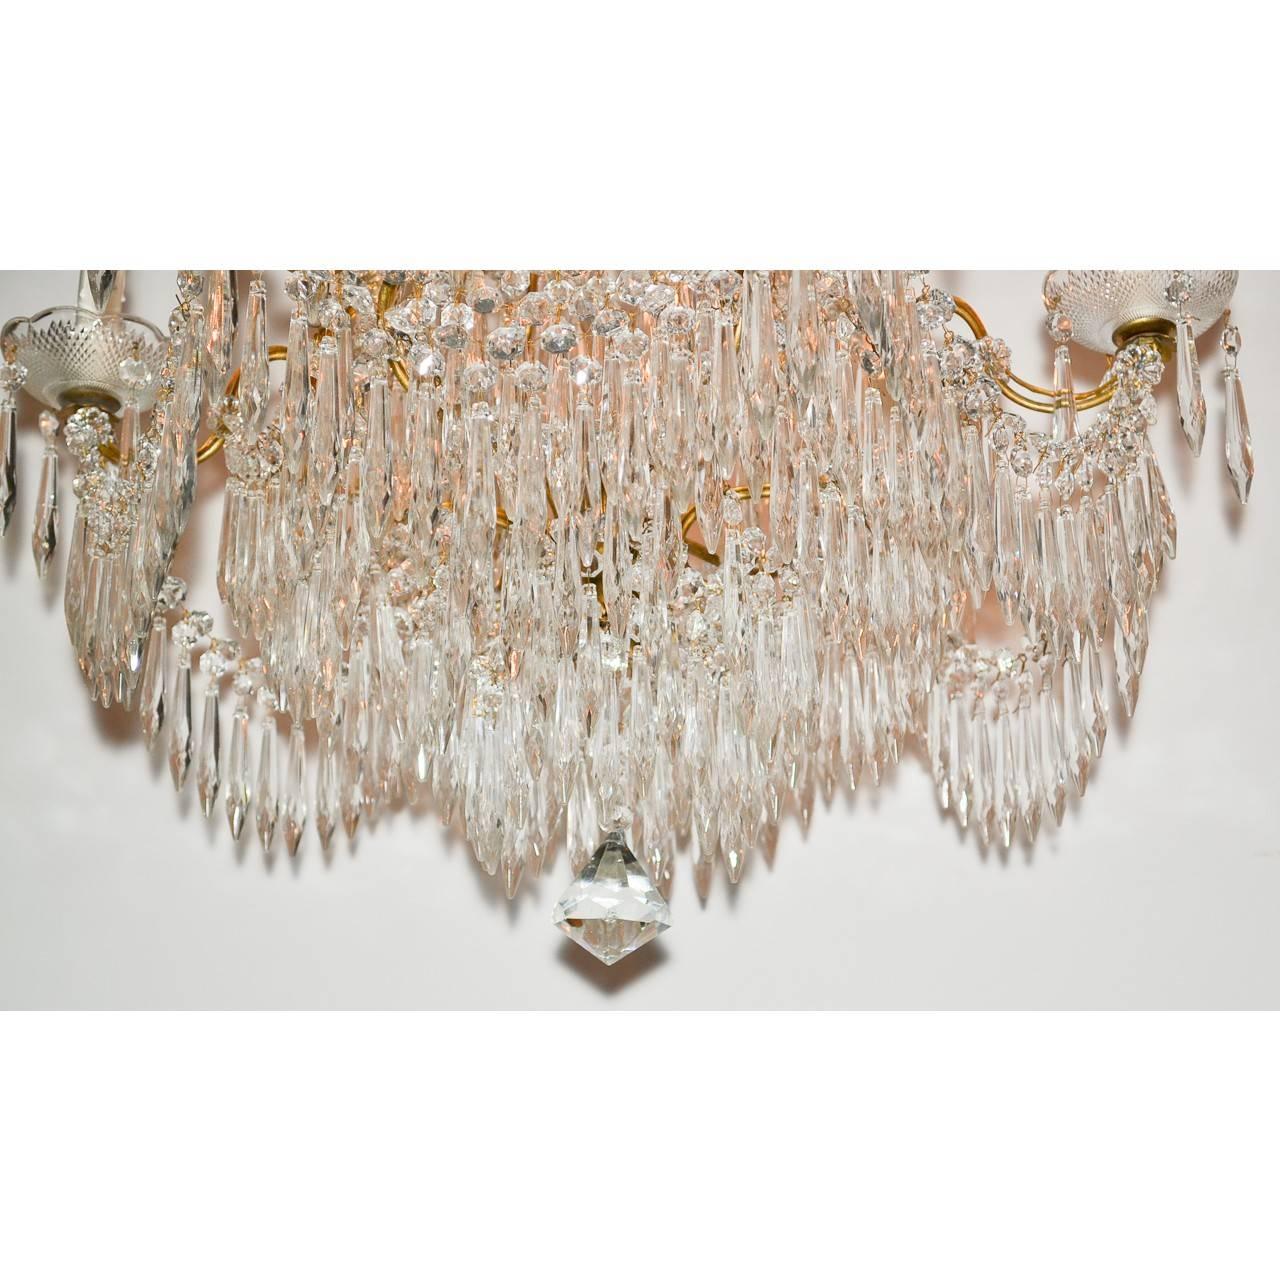 Sparkling midcentury French crystal and gold gilded six-light chandelier lavished with beautifully cut and faceted beaded and spear designed prisms and flower petals. Take notice of the superb scallop edged bobeches,

circa 1940.